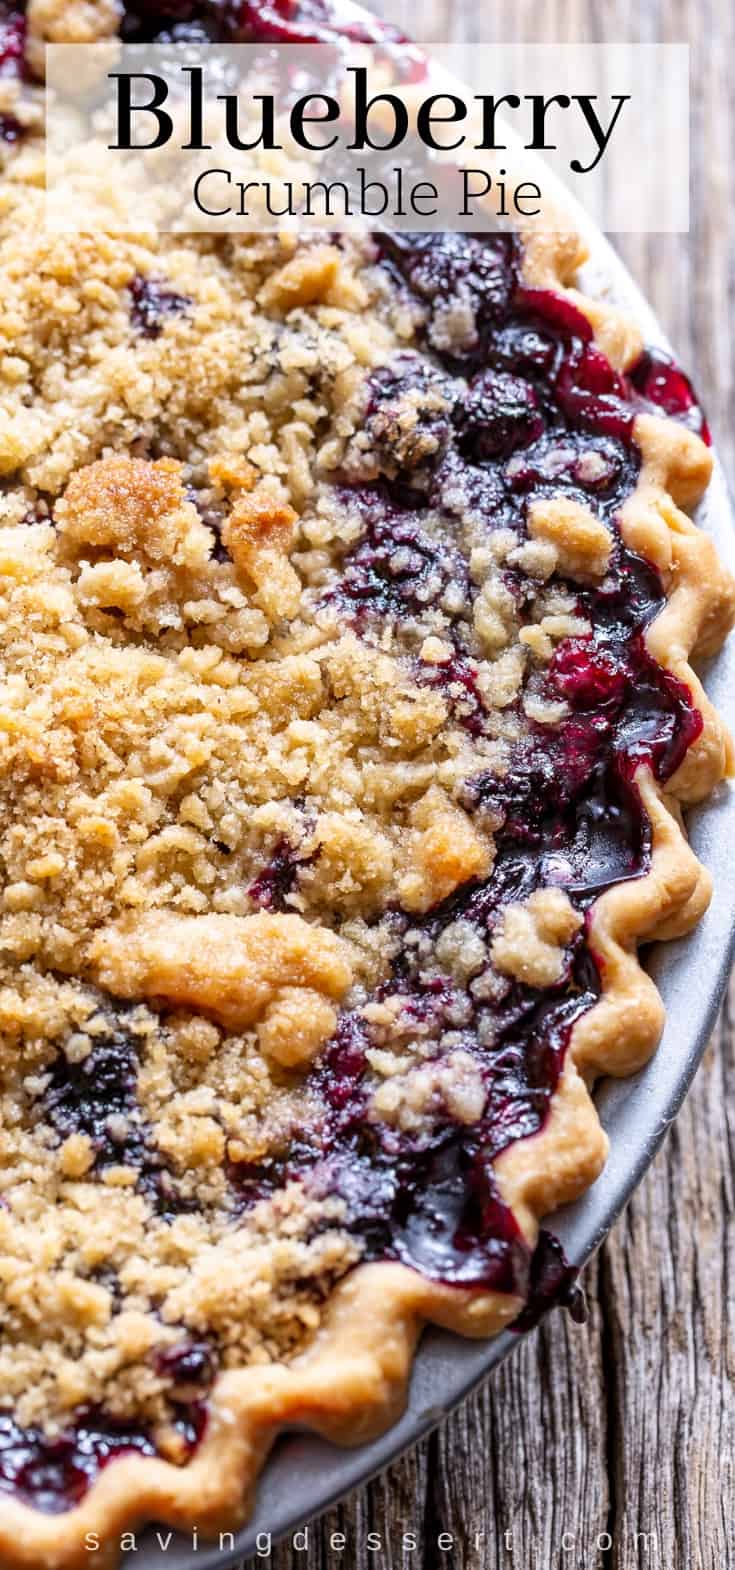 A close up of a blueberry crumble pie with juices overflowing the edges of the crust and pan